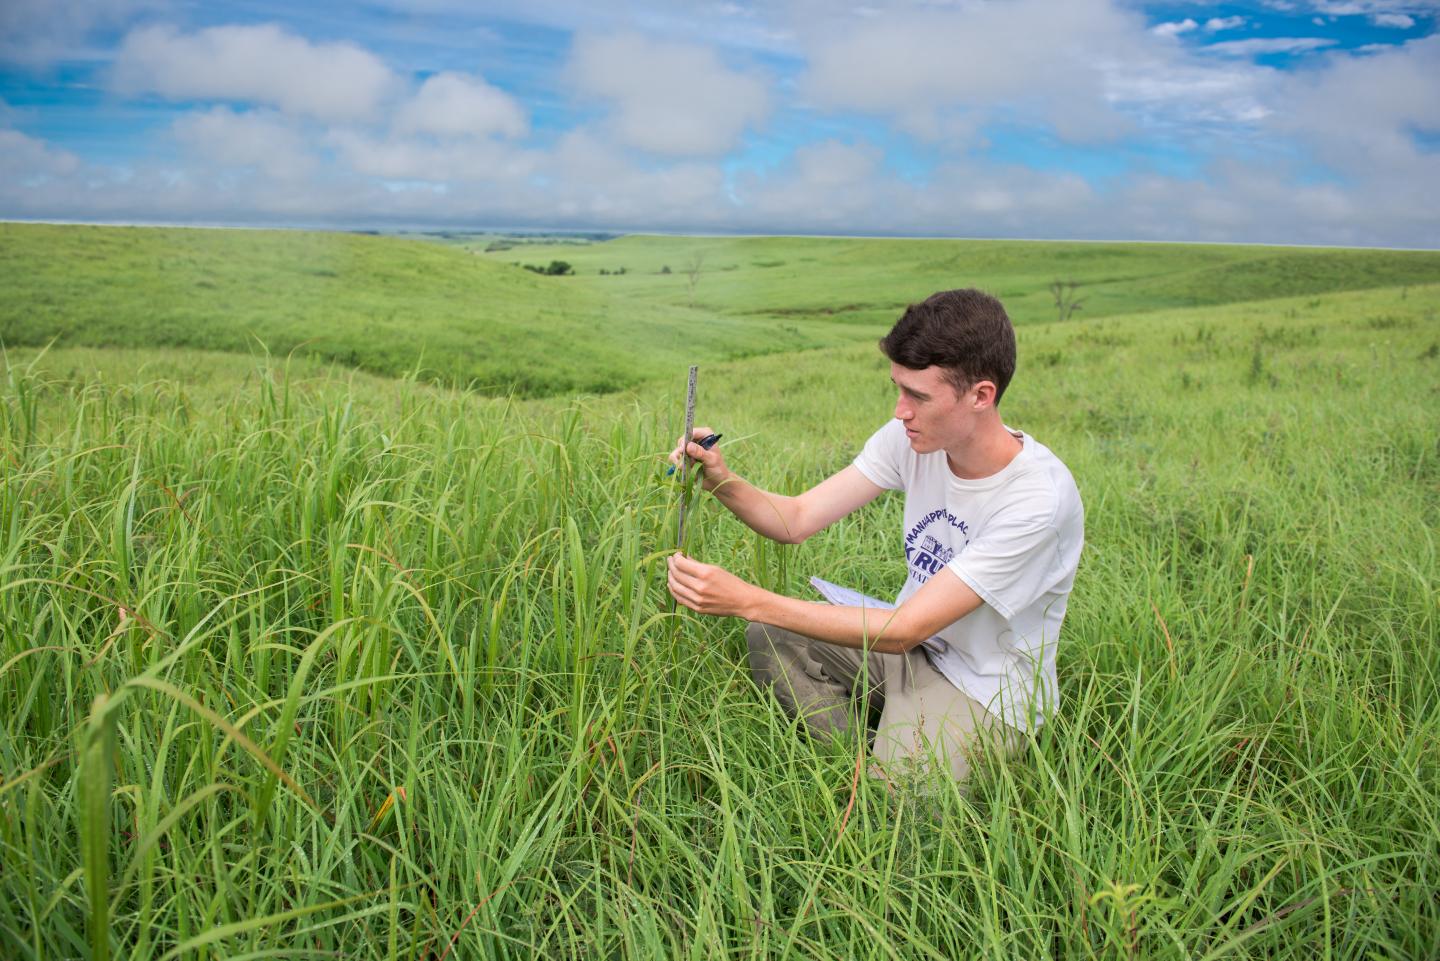 Konza Prairie continues decades of research success with $7.12 million NSF grant renewal -- photo